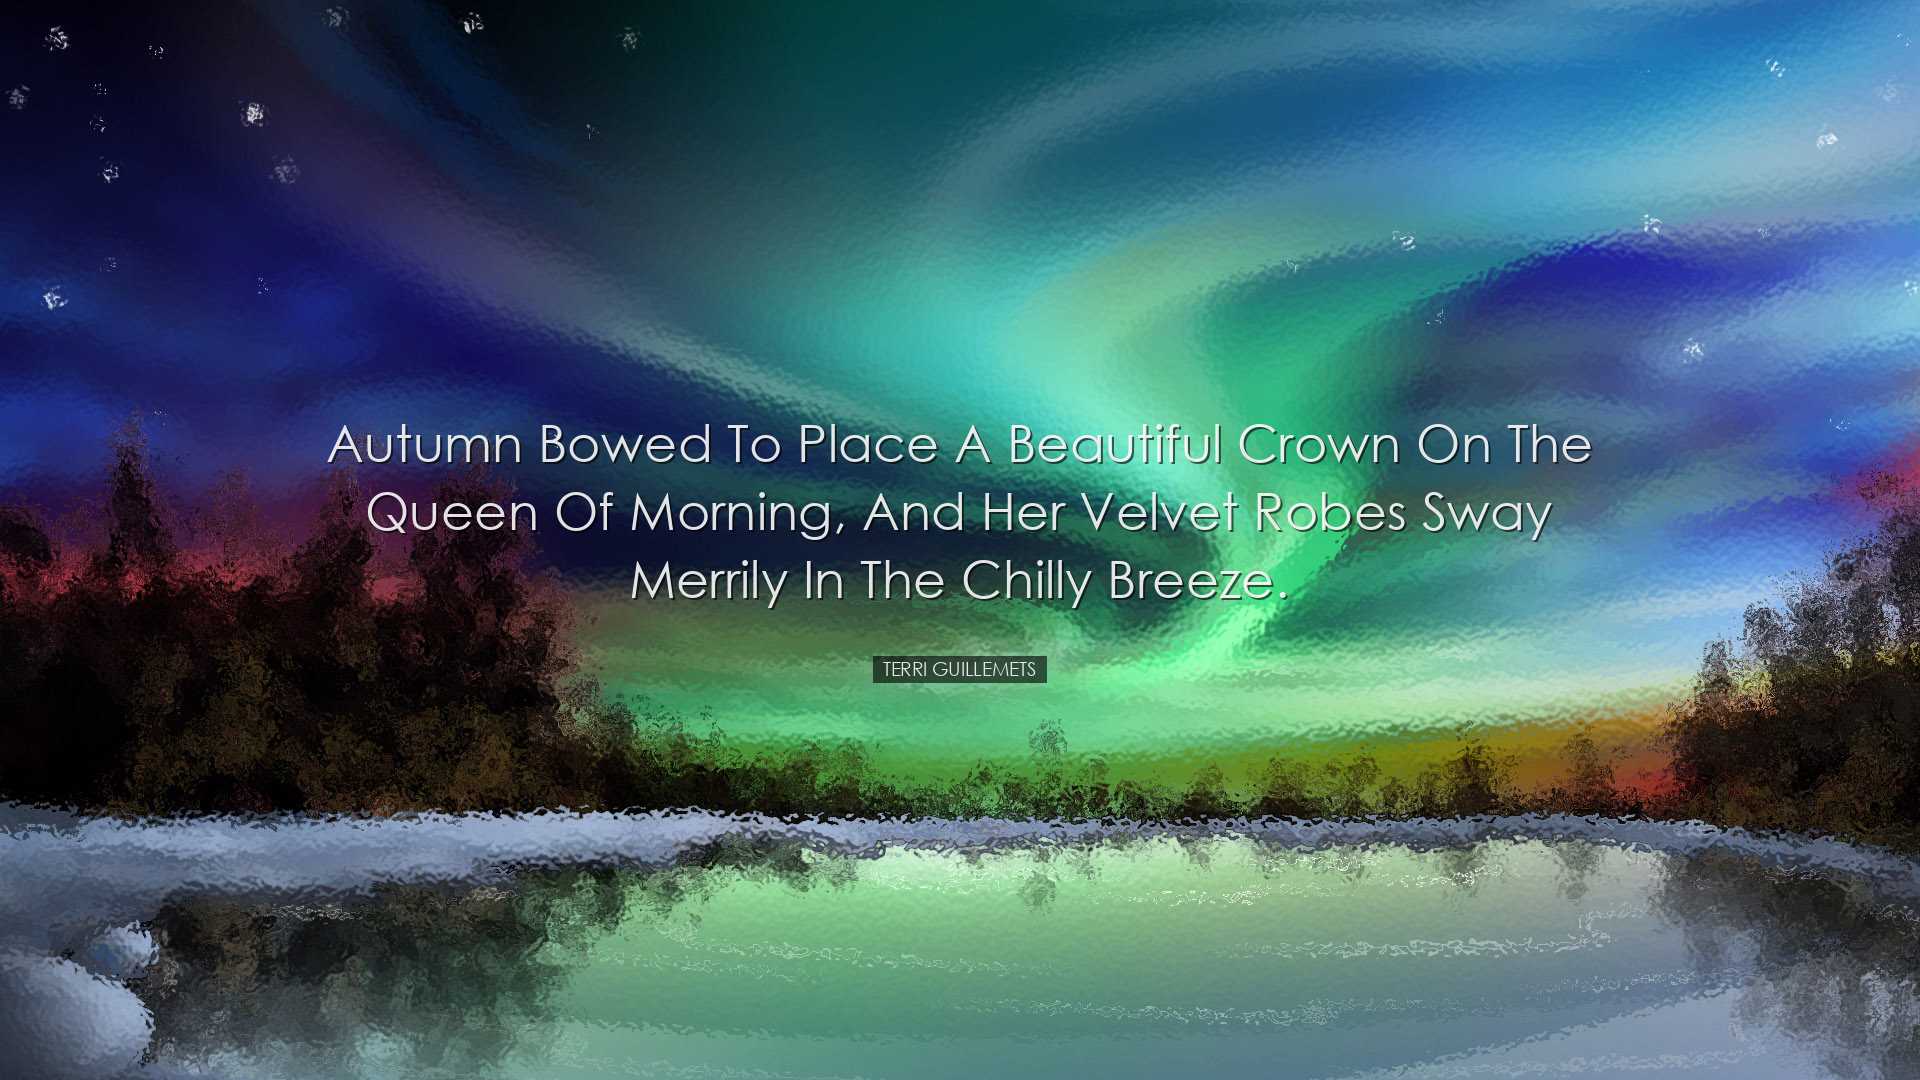 Autumn bowed to place a beautiful crown on the Queen of Morning, a